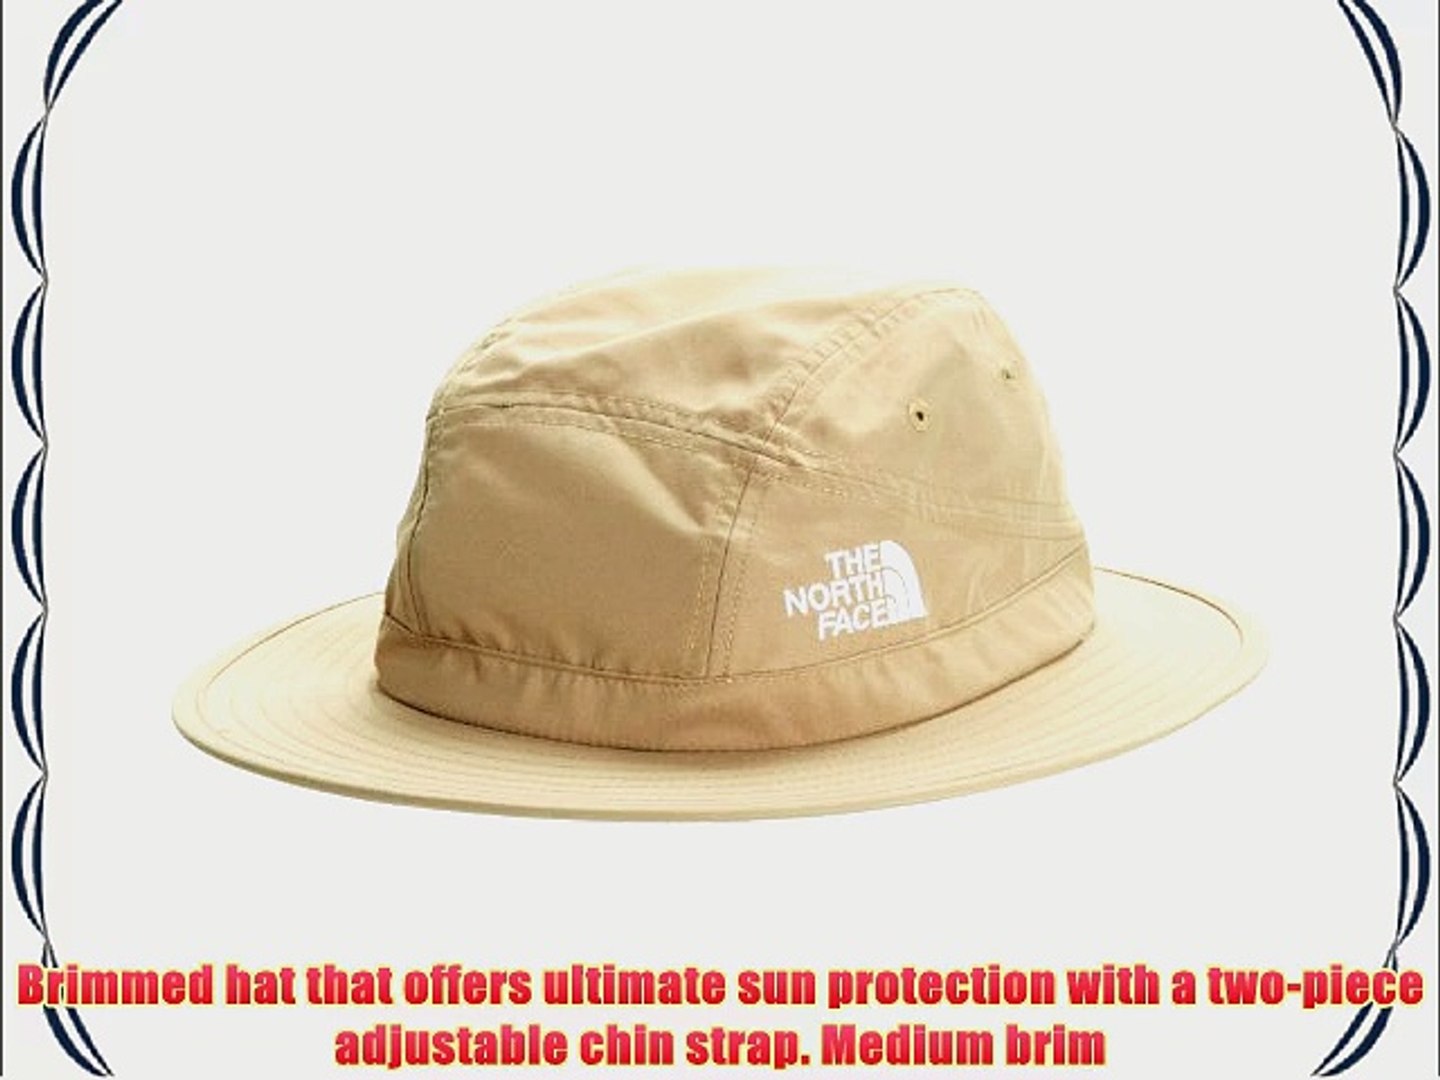 The North Face Unisex Adult Suppertime Hat - Dune Beige/Dune Beige  Small/Medium - video Dailymotion